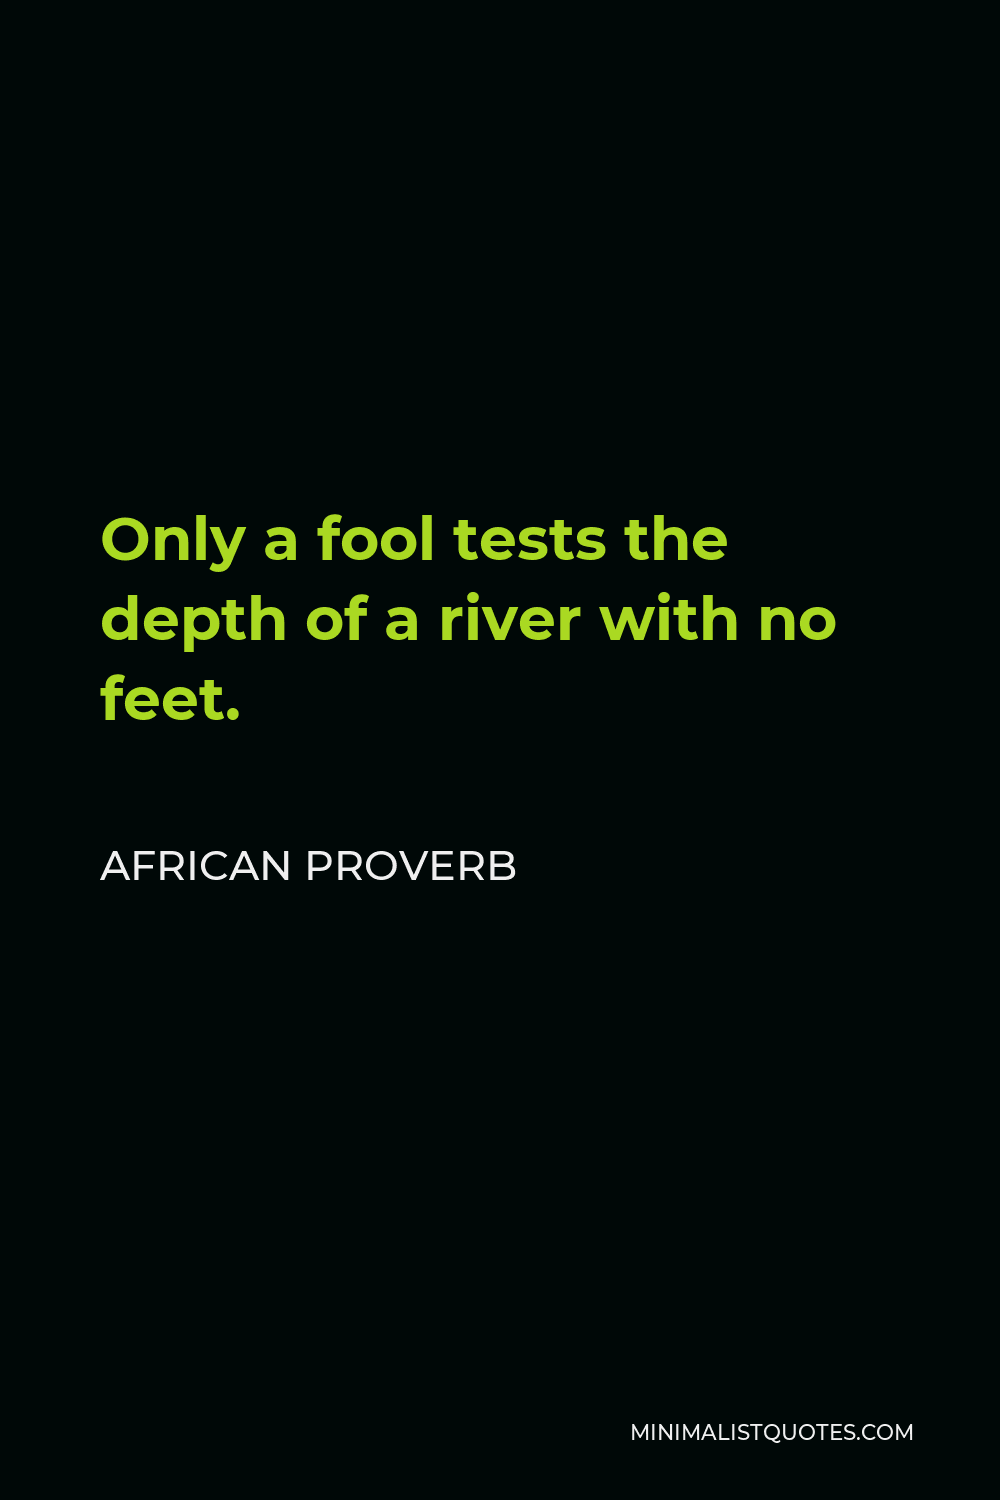 African Proverb Quote - Only a fool tests the depth of a river with no feet.